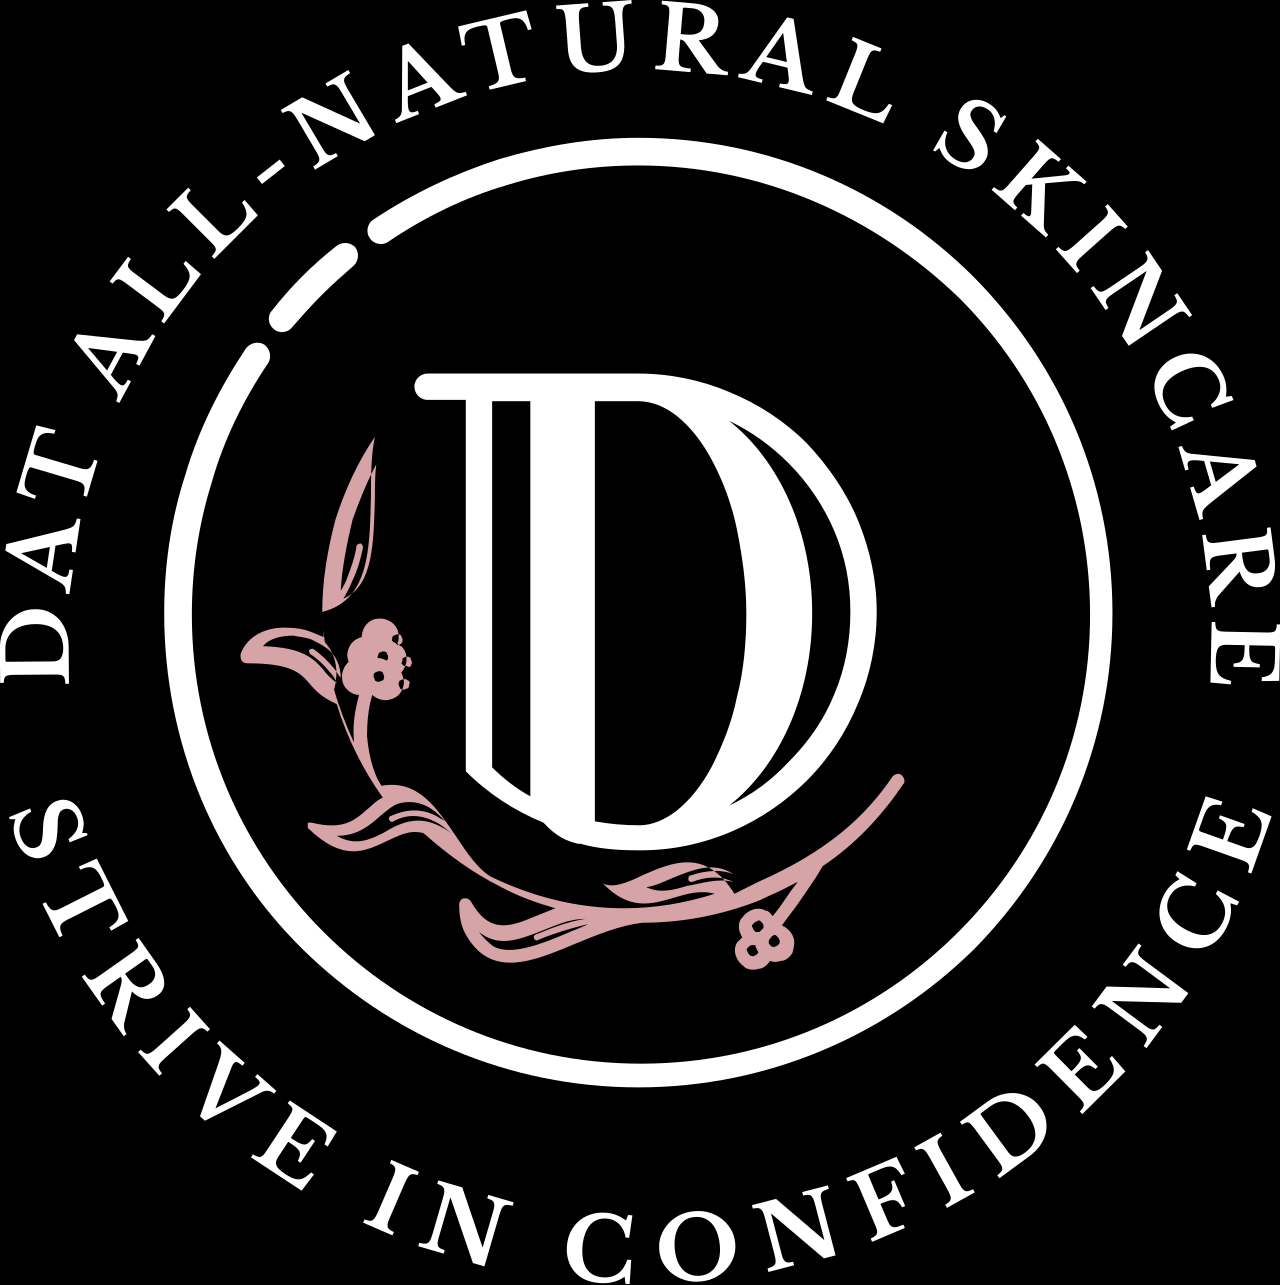 DAT ALL-NATURAL SKINCARE's web page